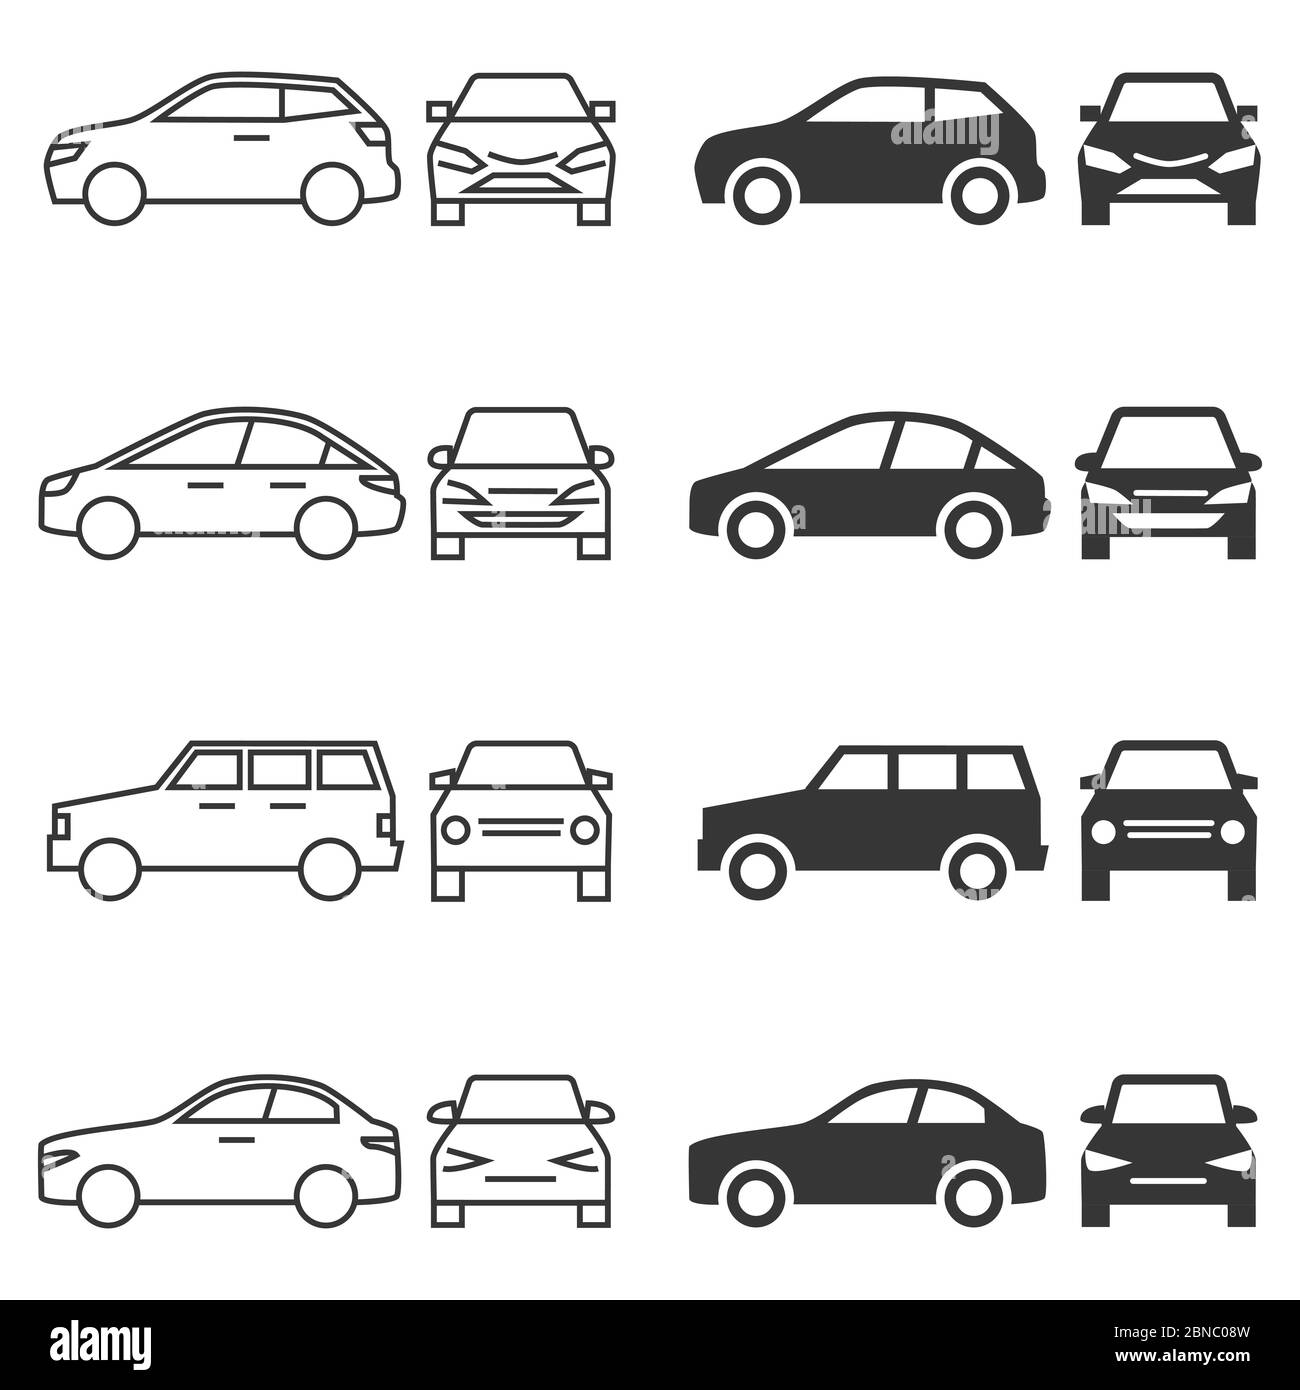 Front and side view car icons - line and silhouette cars isolated on white background. Vector illustration Stock Vector